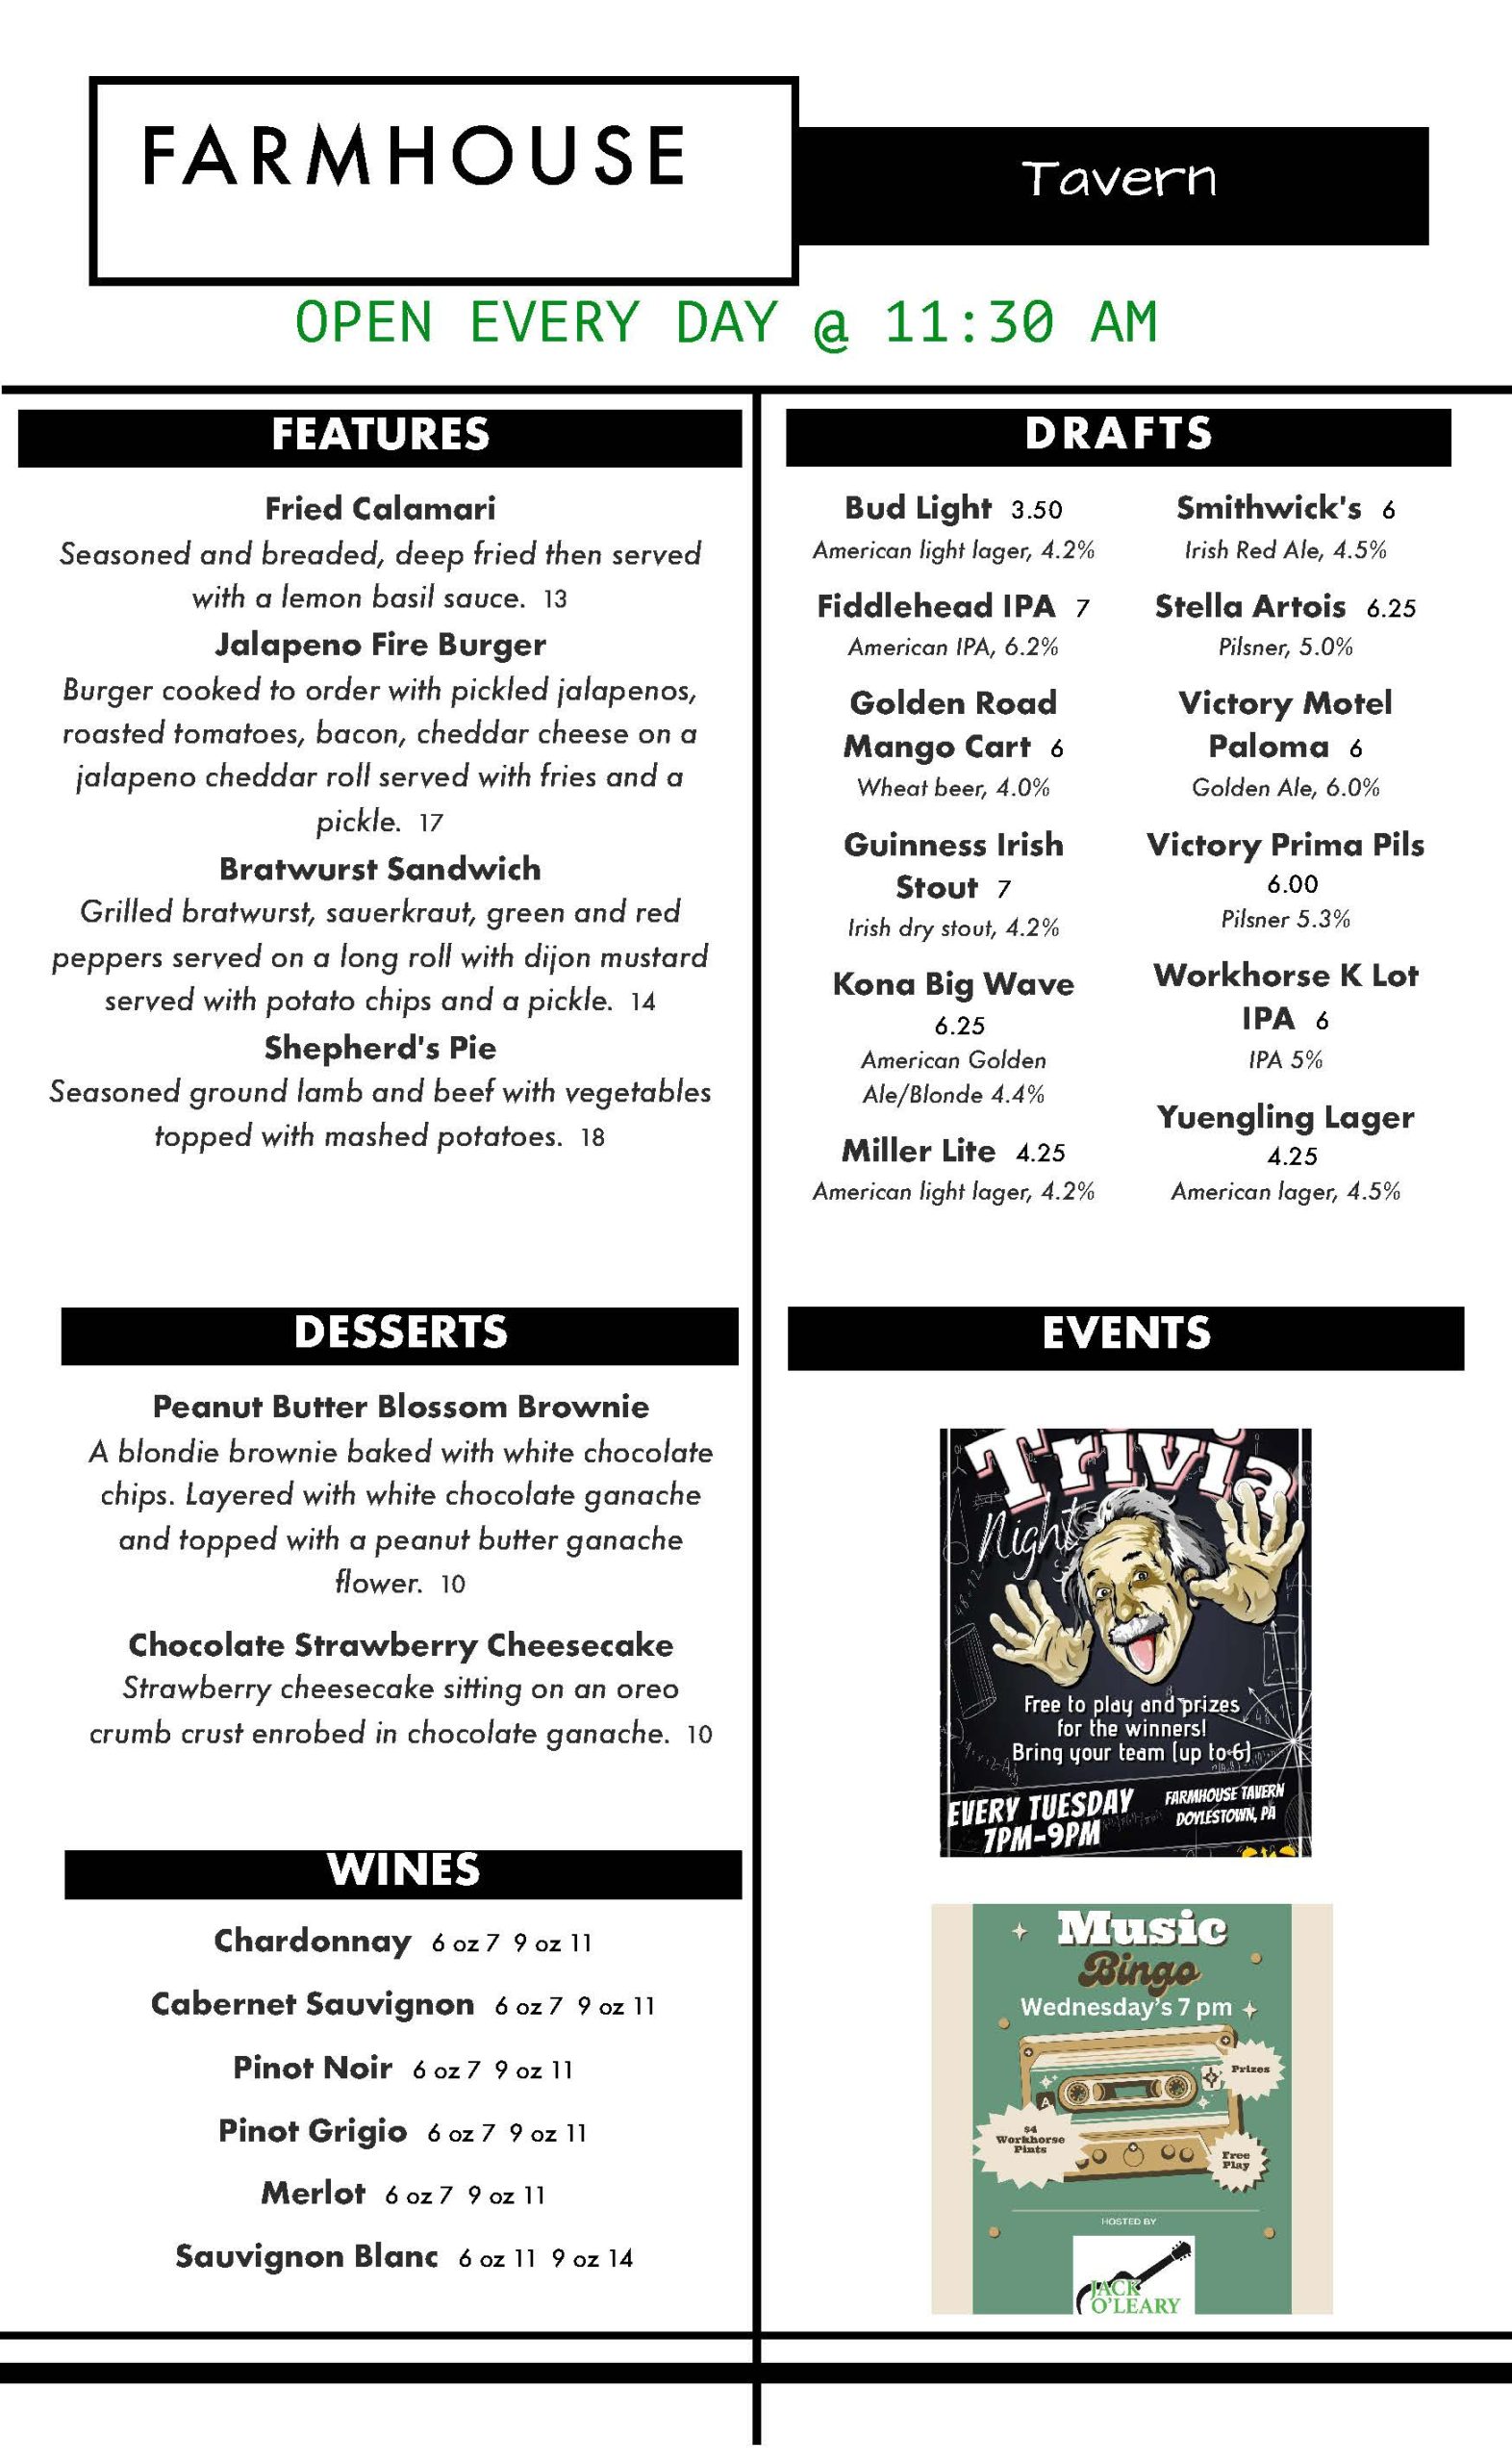 Menu board for farmhouse tavern showing daily specials, drinks list including beers, wines, and desserts with a modern black and white design.